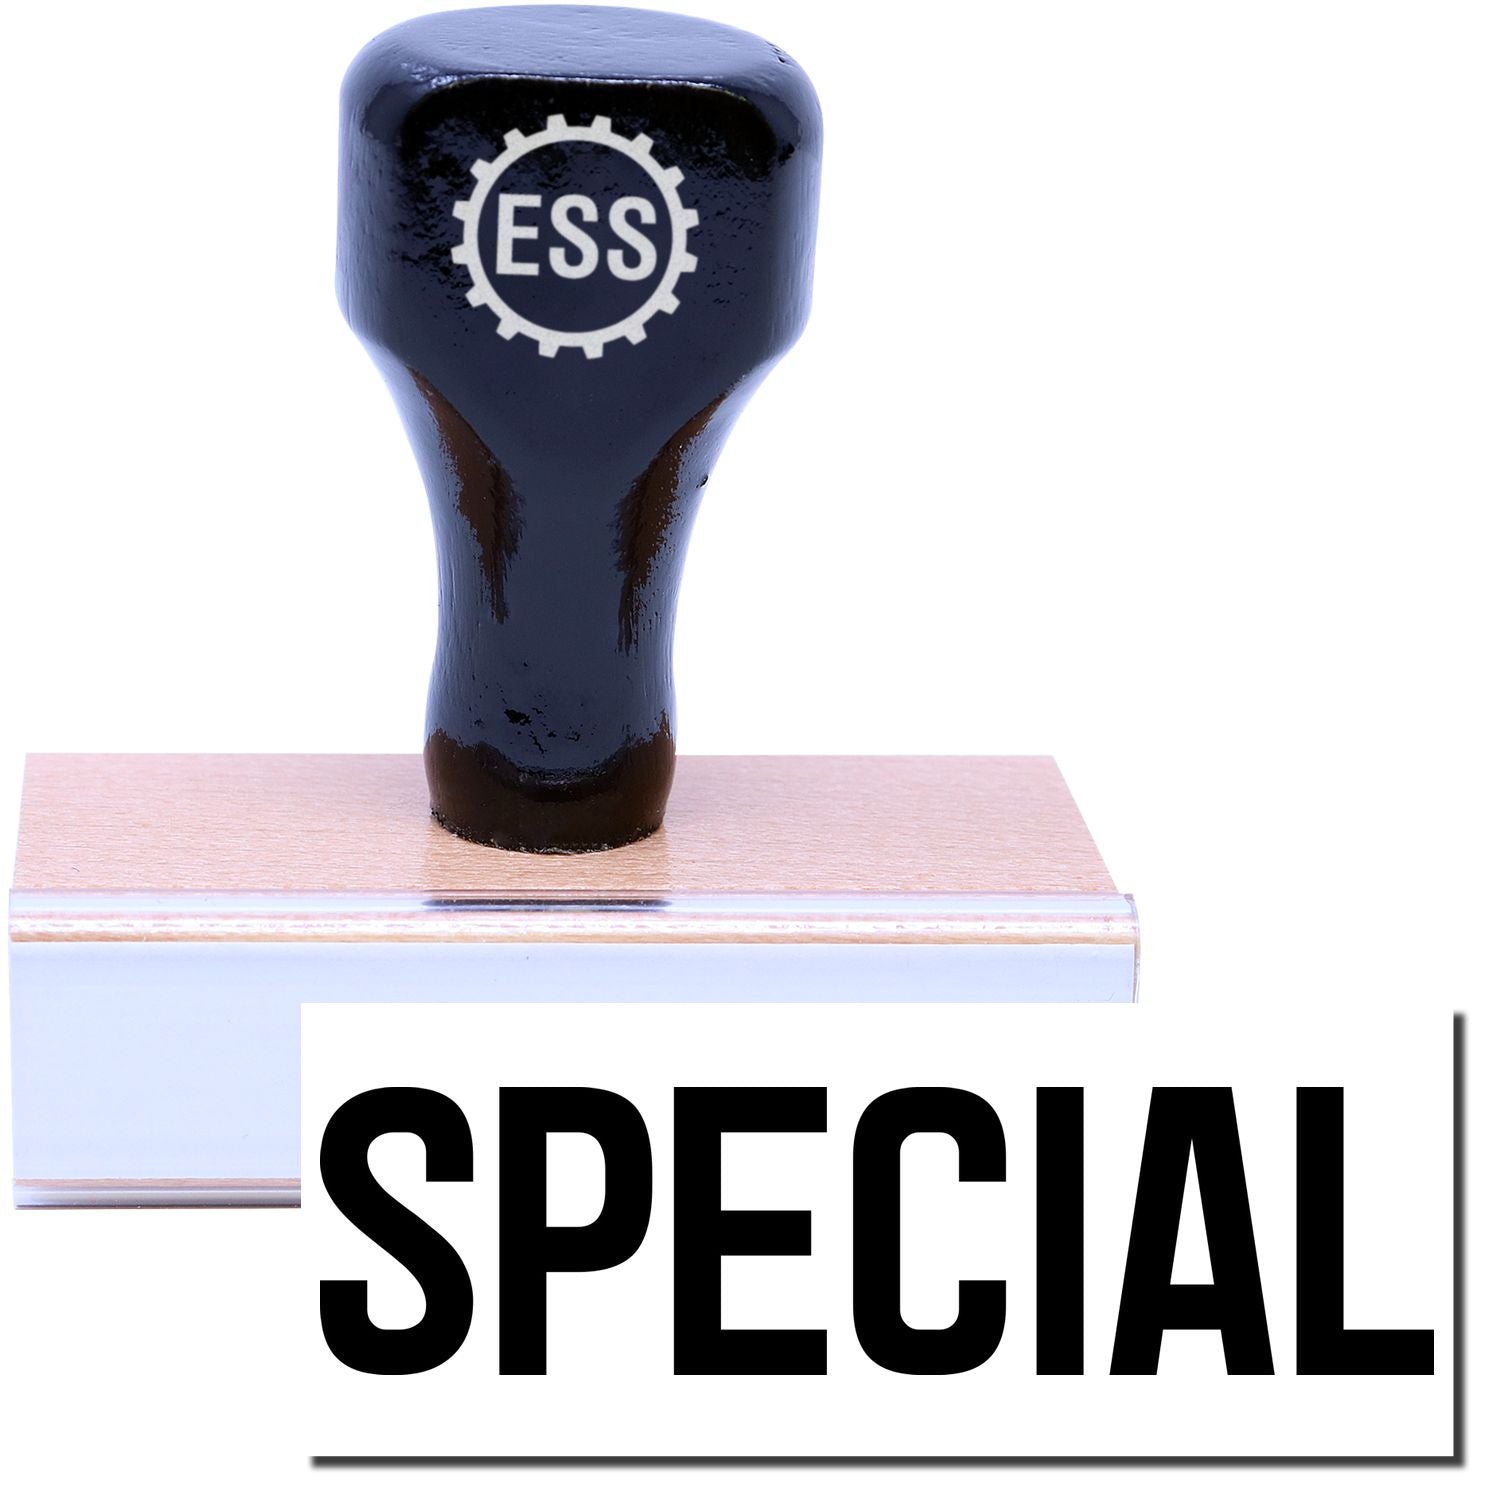 A stock office rubber stamp with a stamped image showing how the text "SPECIAL" in a large font is displayed after stamping.